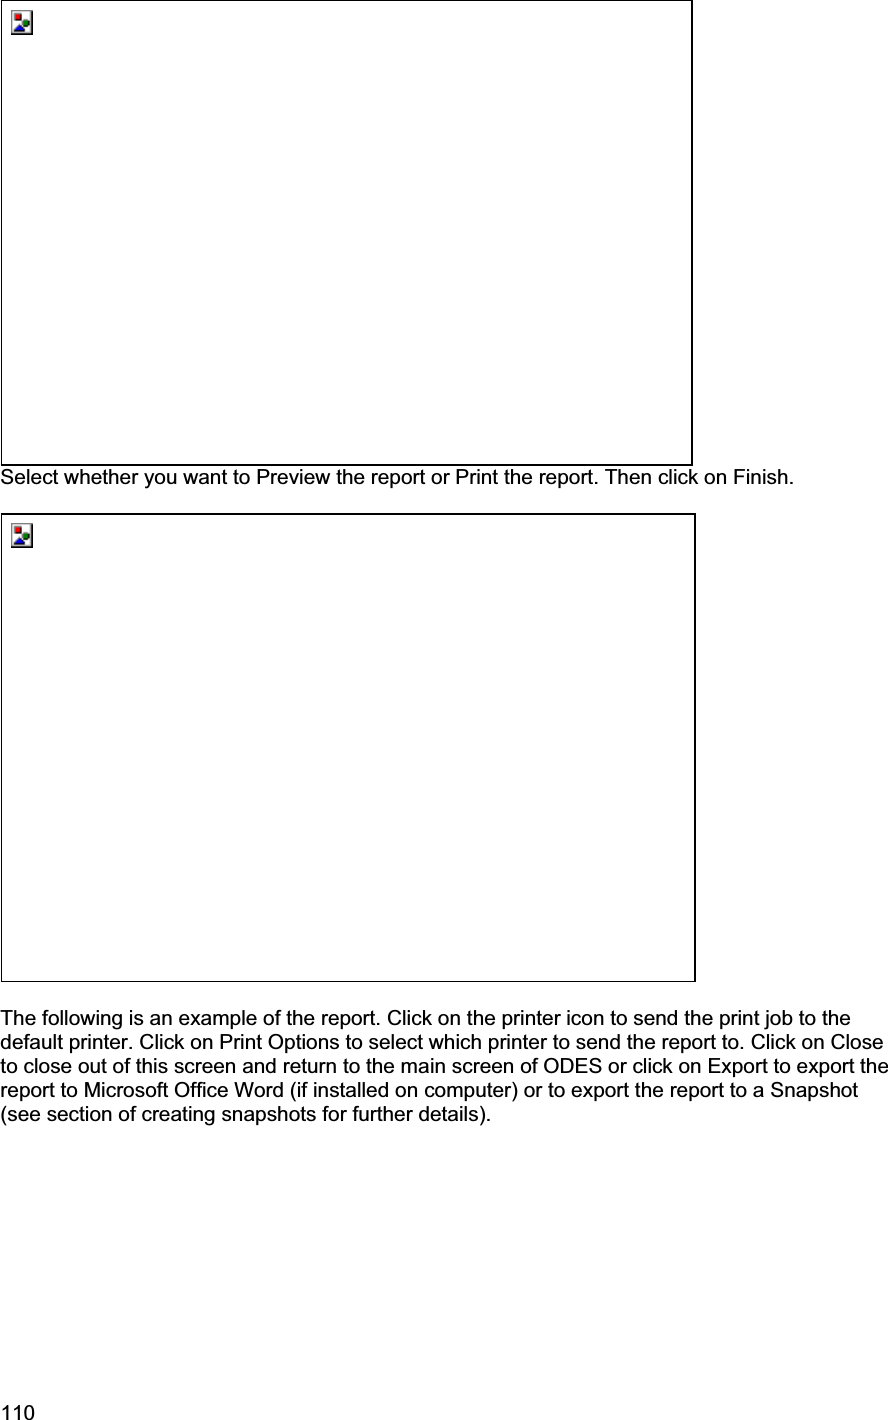 110     Select whether you want to Preview the report or Print the report. Then click on Finish.  The following is an example of the report. Click on the printer icon to send the print job to the default printer. Click on Print Options to select which printer to send the report to. Click on Close to close out of this screen and return to the main screen of ODES or click on Export to export the report to Microsoft Office Word (if installed on computer) or to export the report to a Snapshot (see section of creating snapshots for further details). 